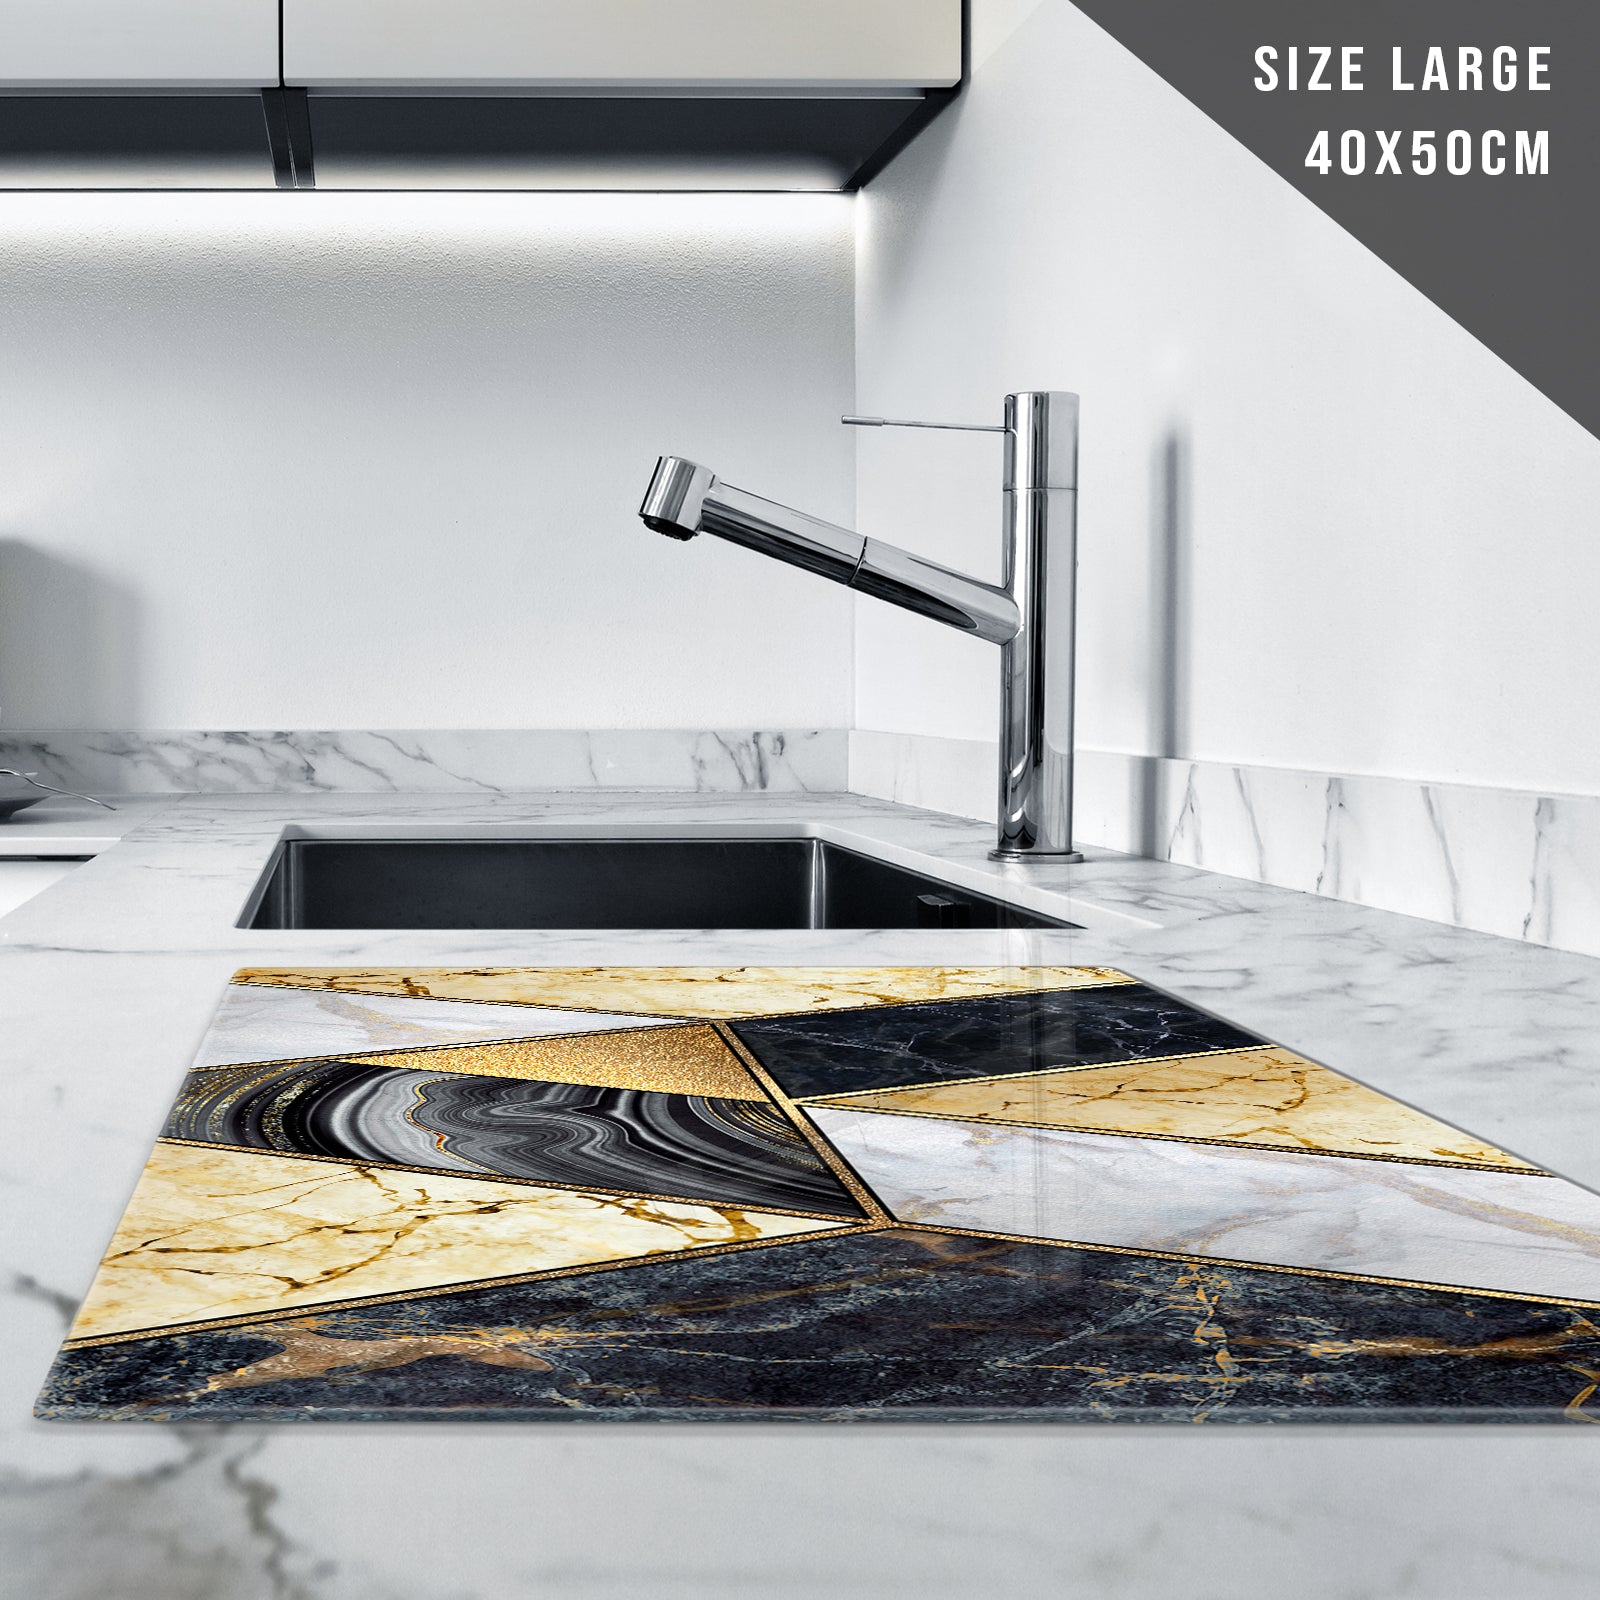 Glass Chopping Board for Kitchen in Geometric Black Gold Design